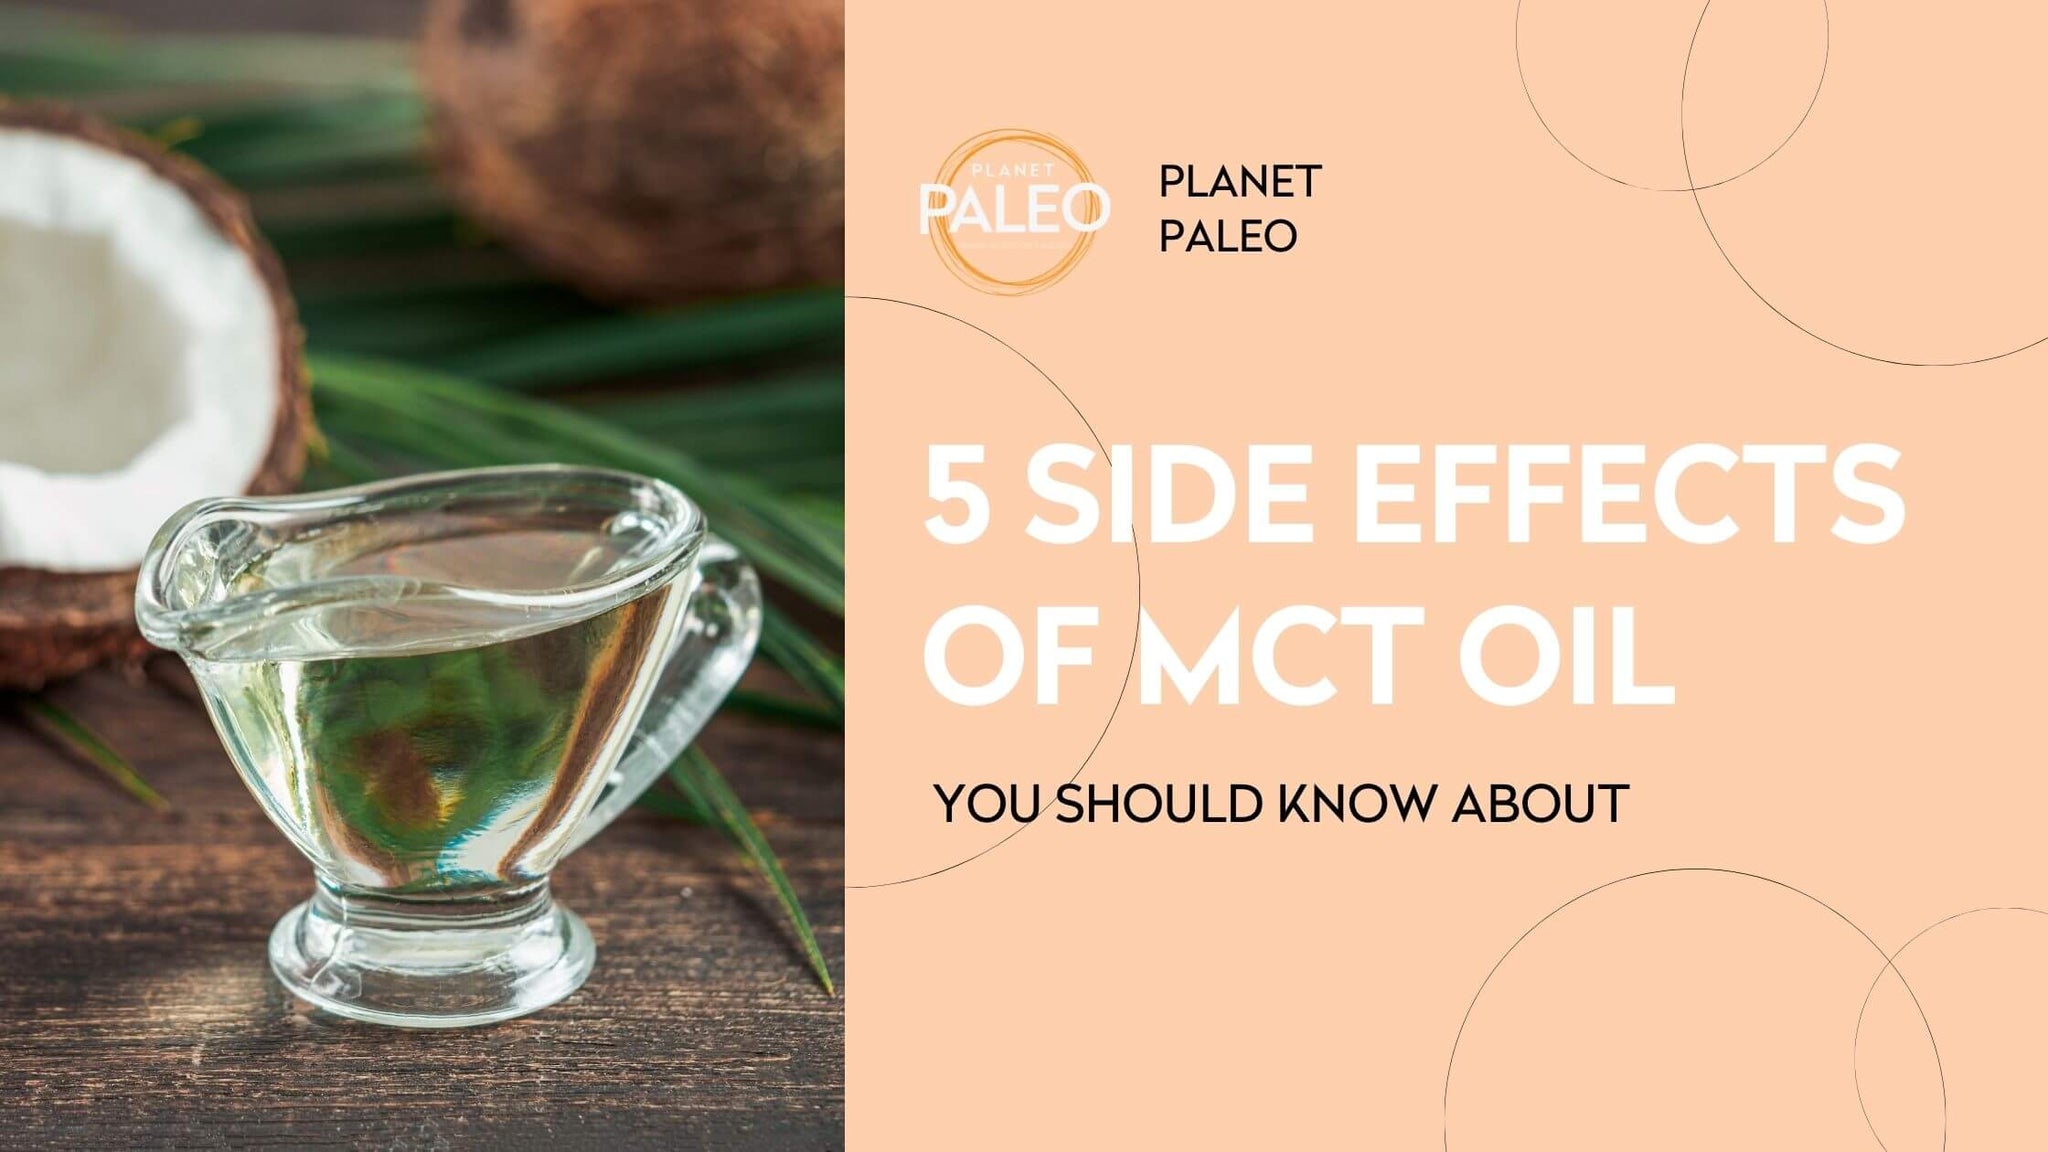 5 Side Effects of MCT Oil You Should Know About